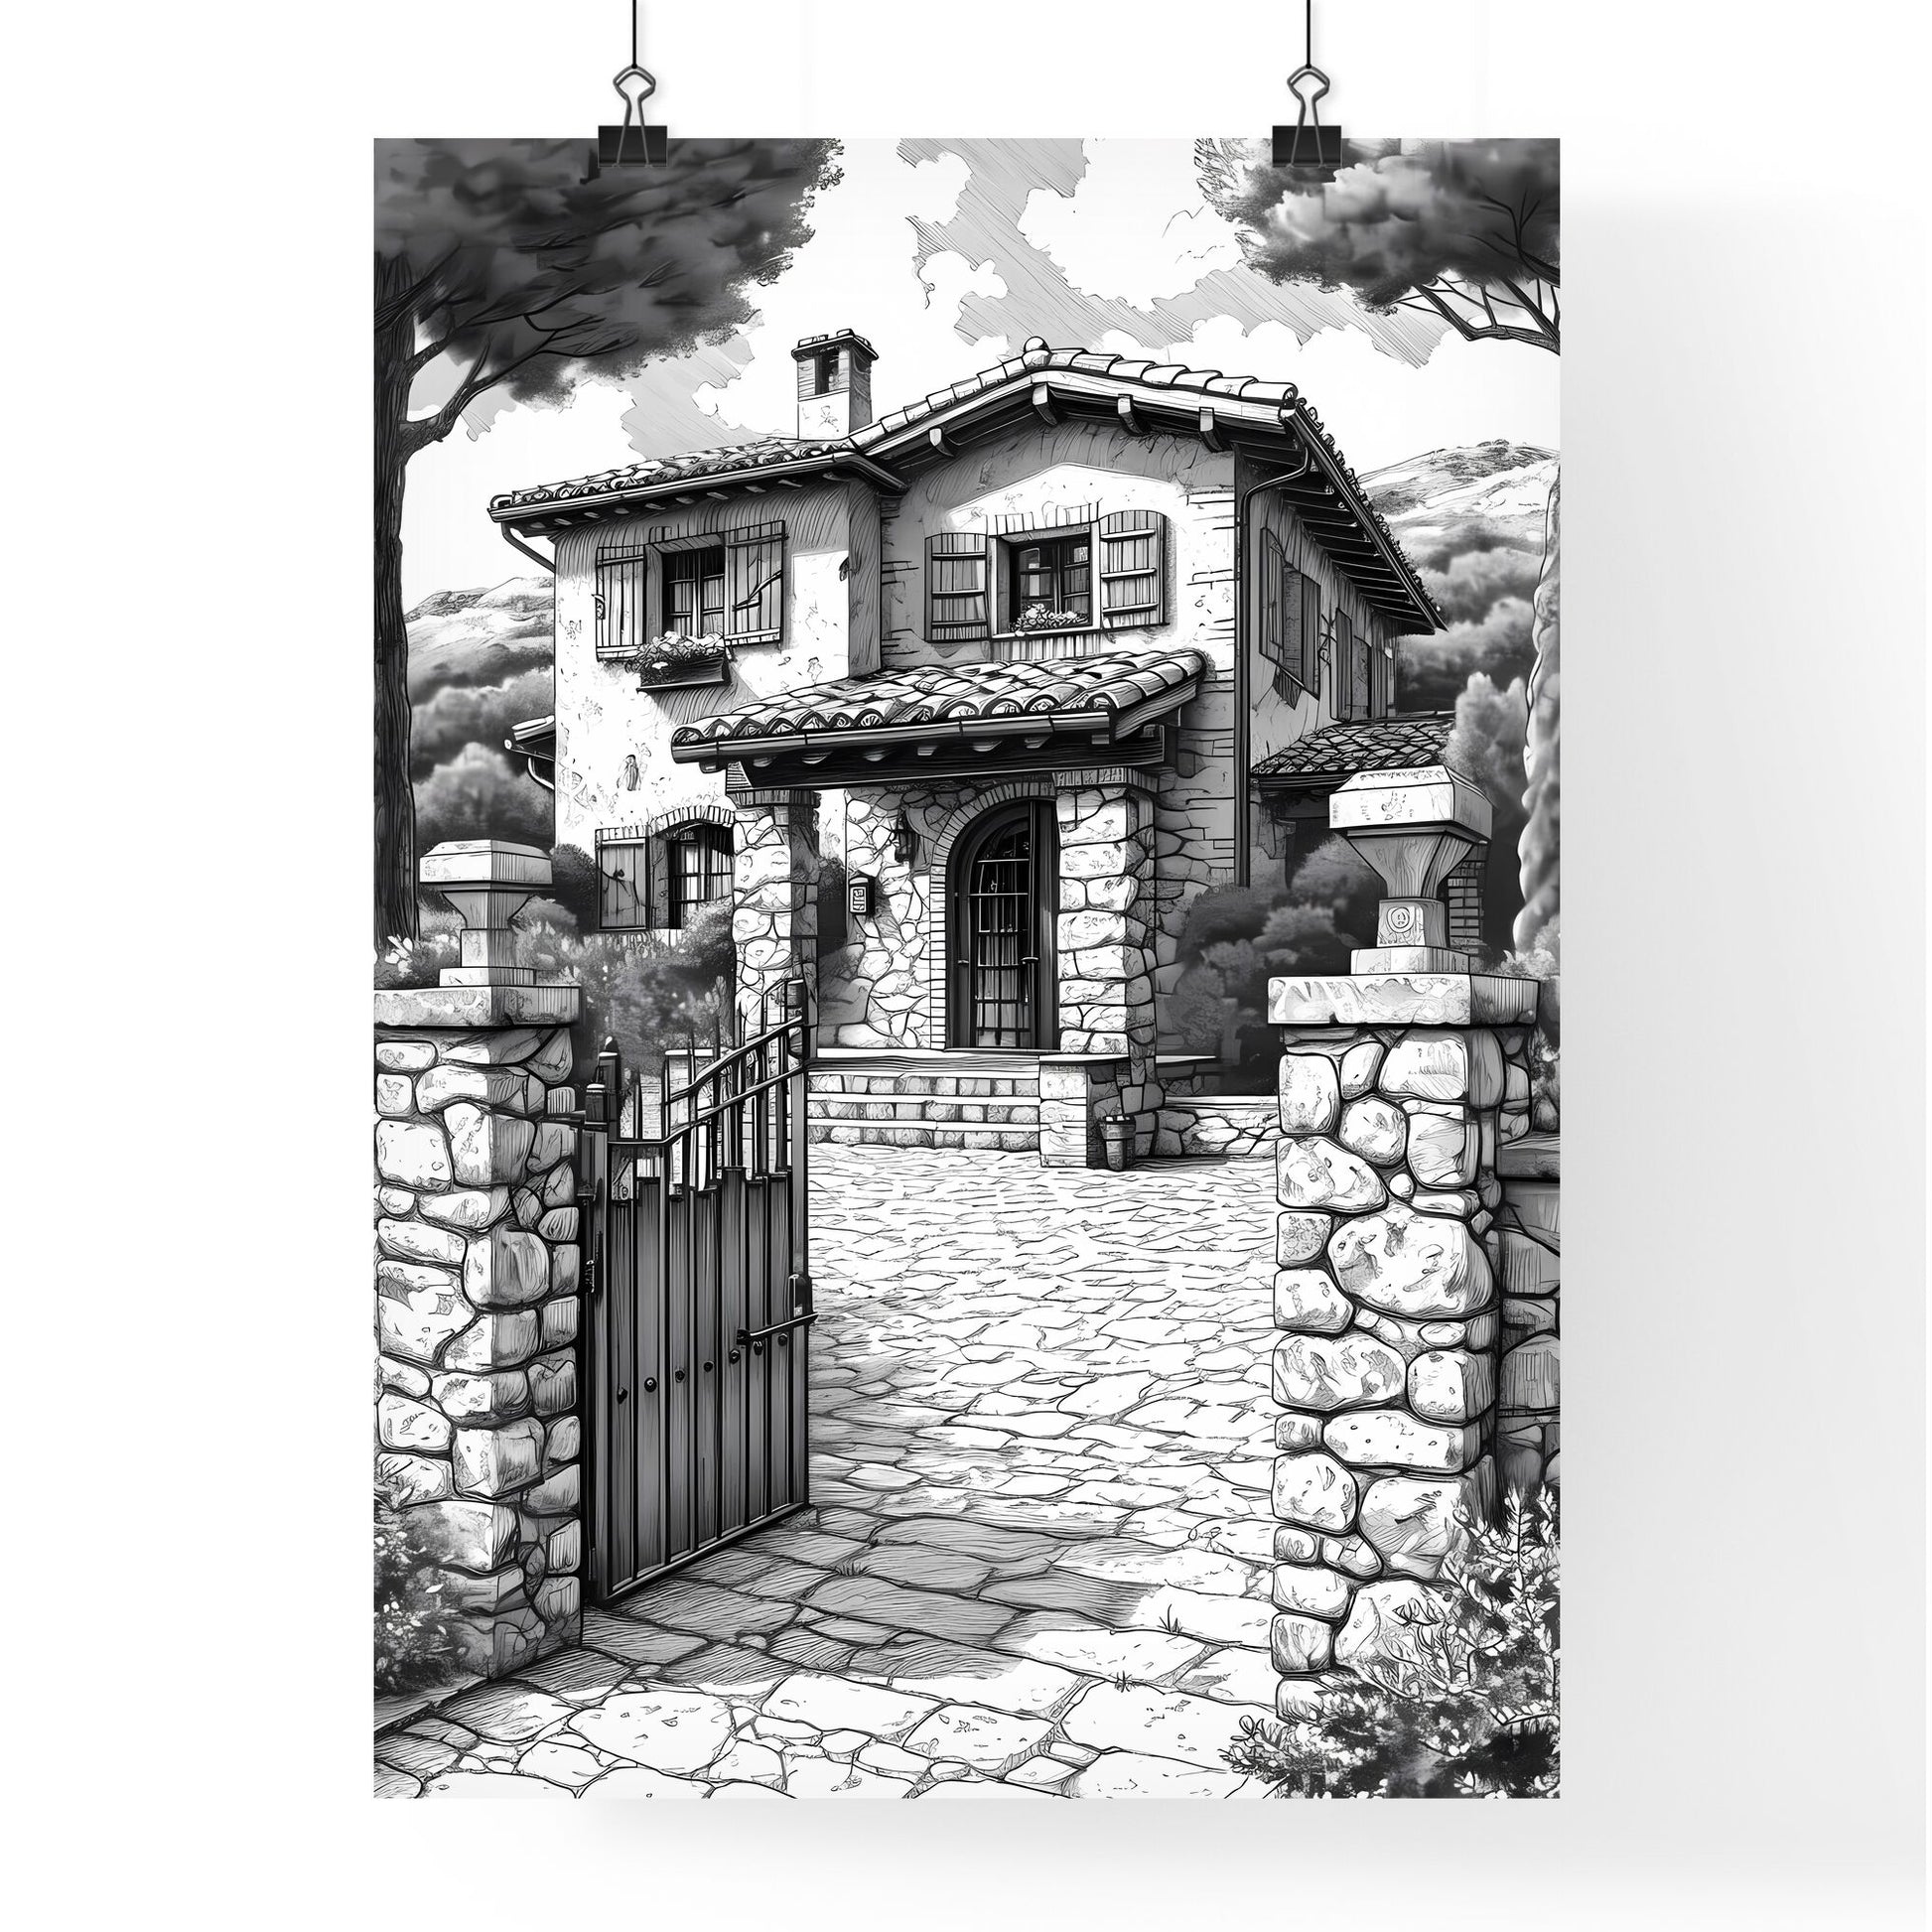 A French Chateau winery - Art print of a drawing of a house with a gate and trees Default Title